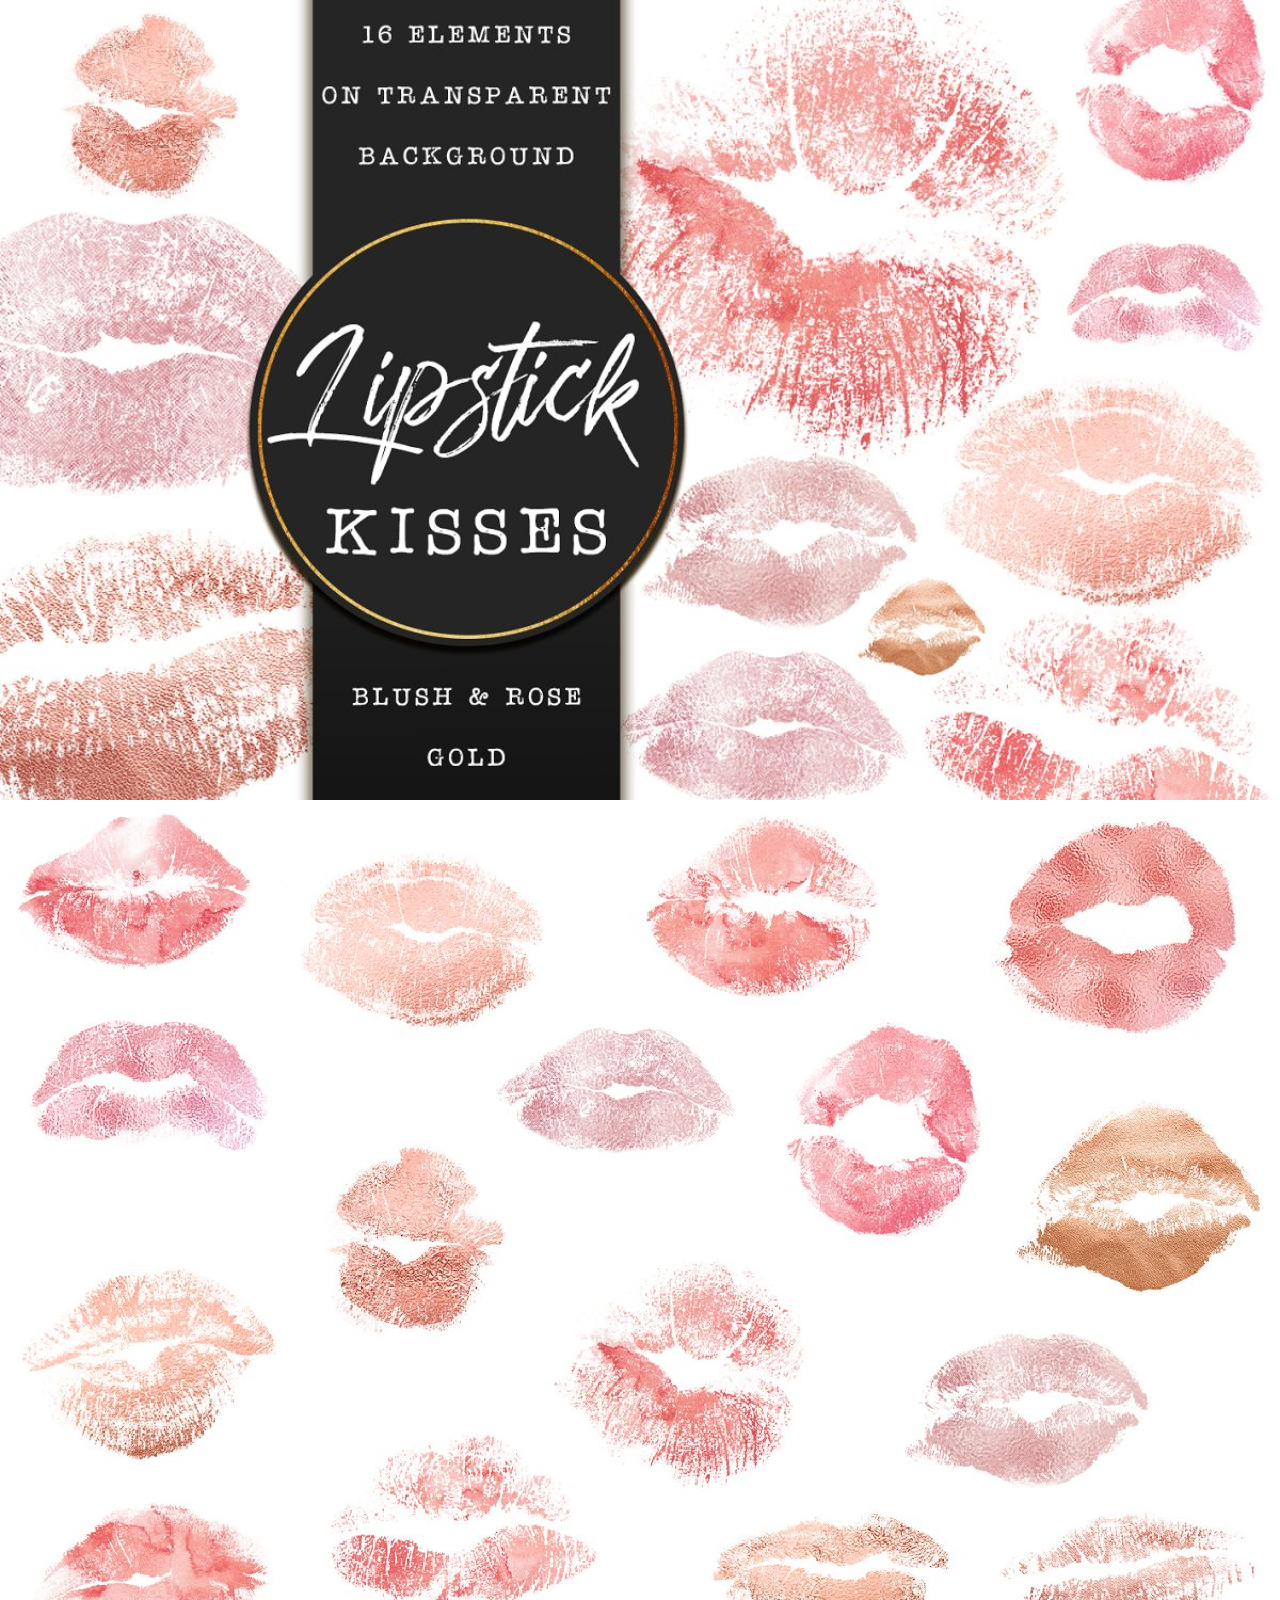 Rose gold kiss marks pinterest image preview.